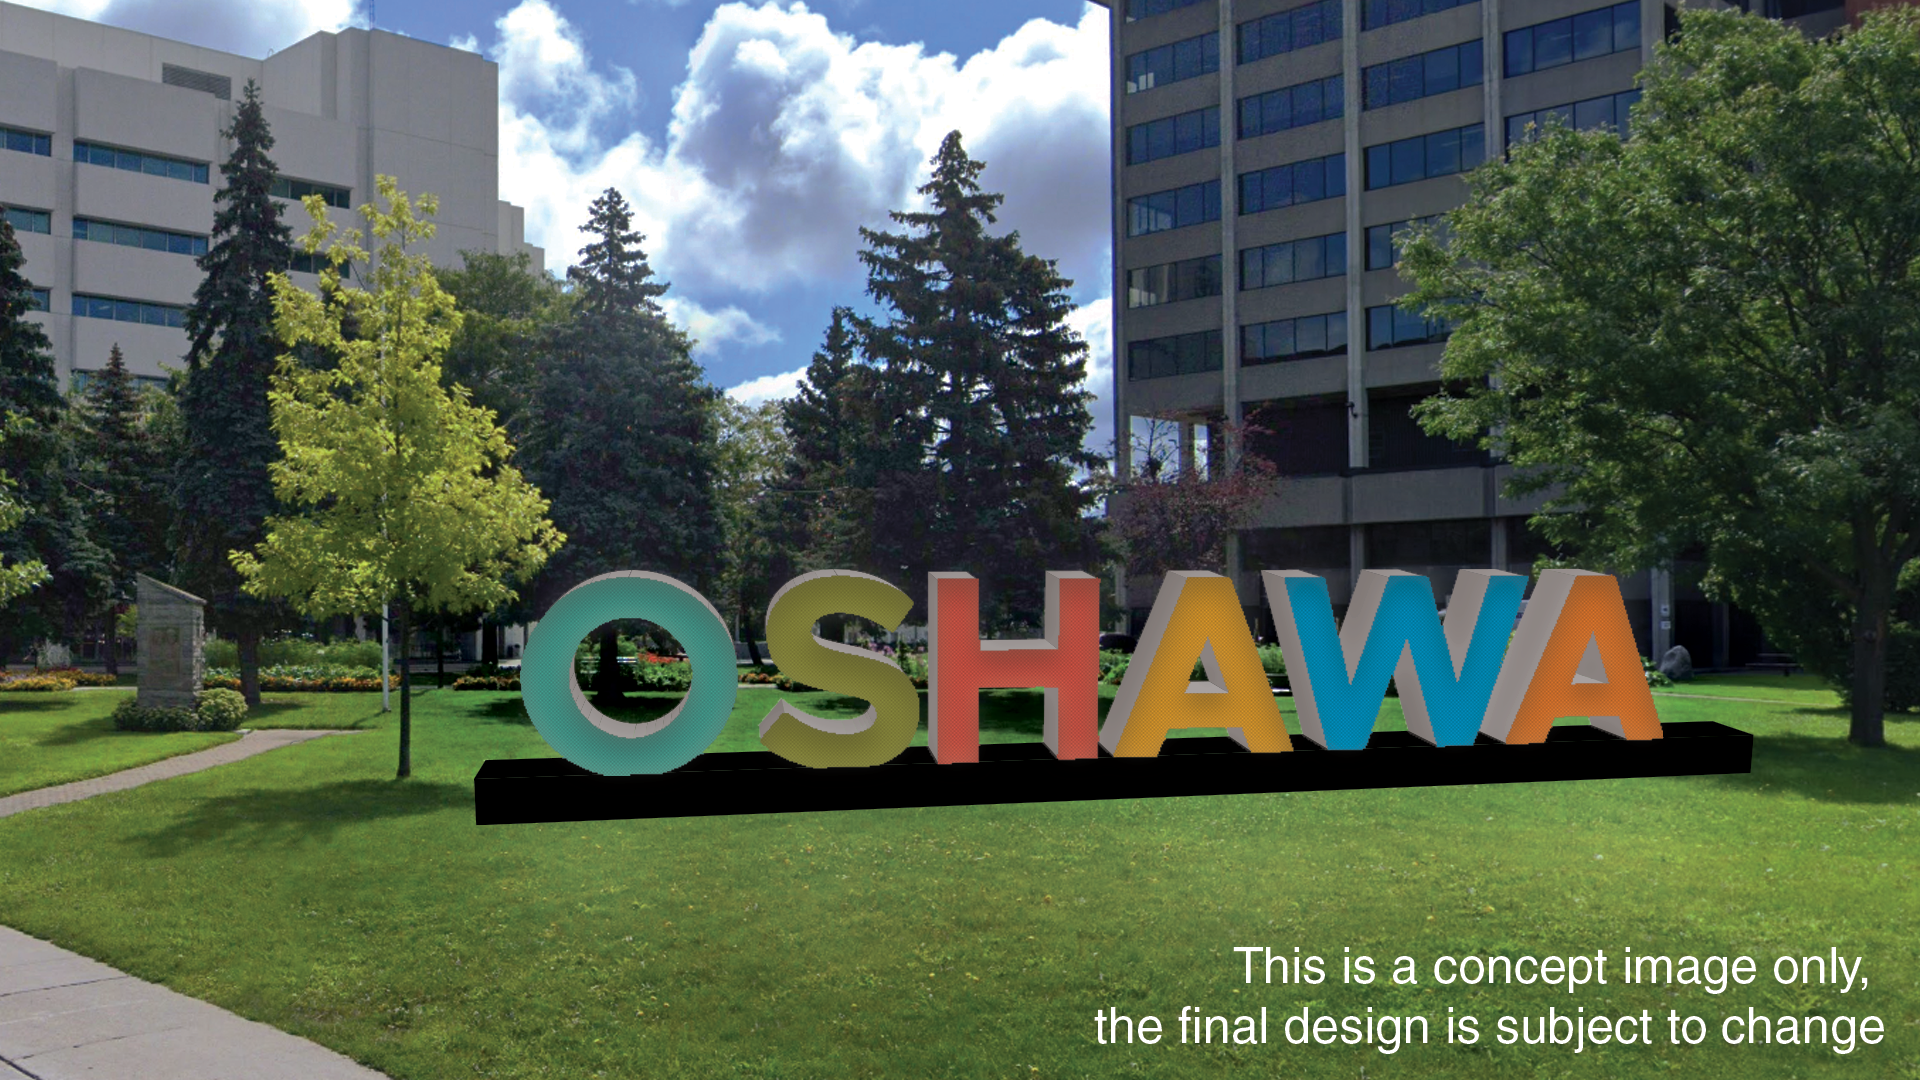 the word oshawa with each letter a different colour on the lawn in front of a large building in a park like setting